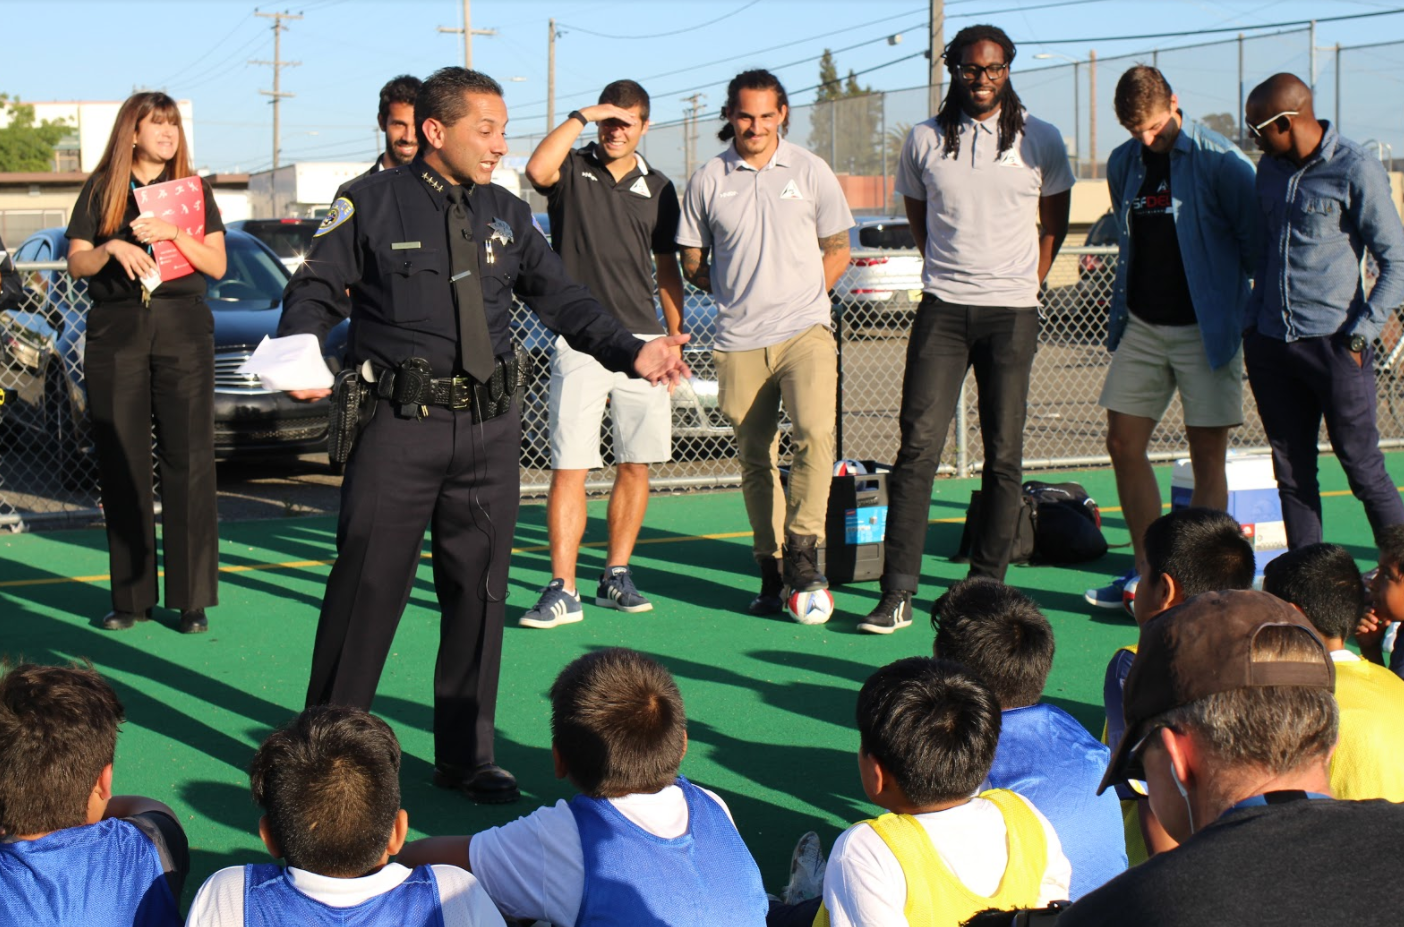 BART Police Chief Carlos Rojas visits with Leopards players at a practice